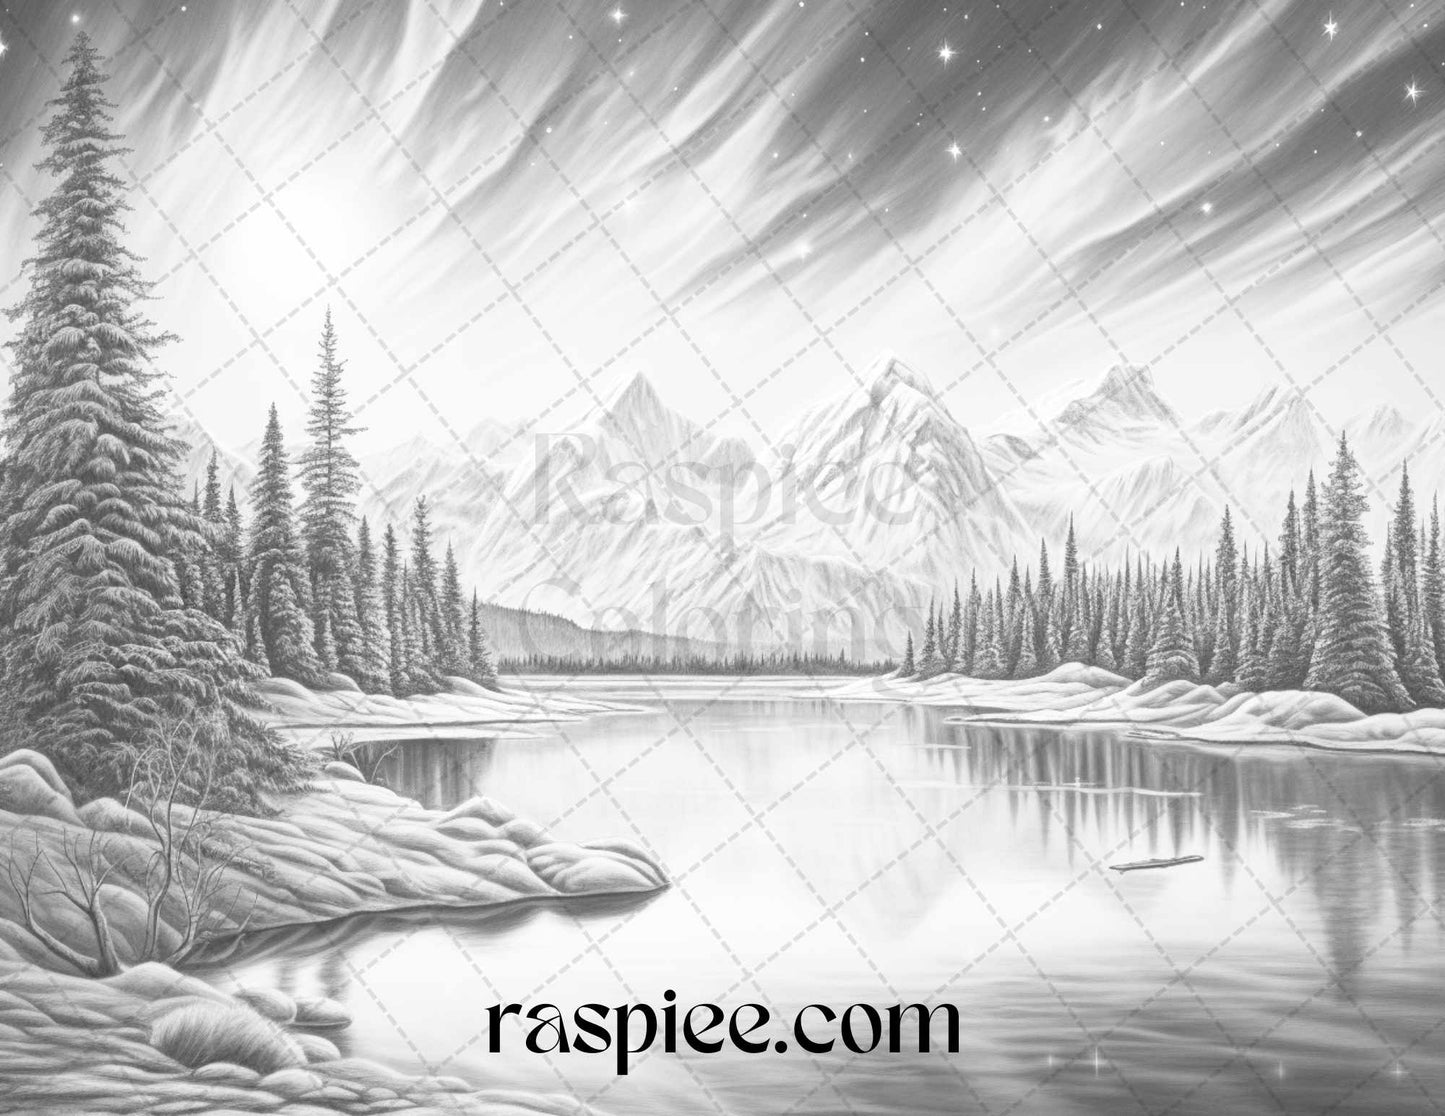 Aurora Borealis Landscape Grayscale Coloring Pages for Adults, Printable PDF File Instant Download